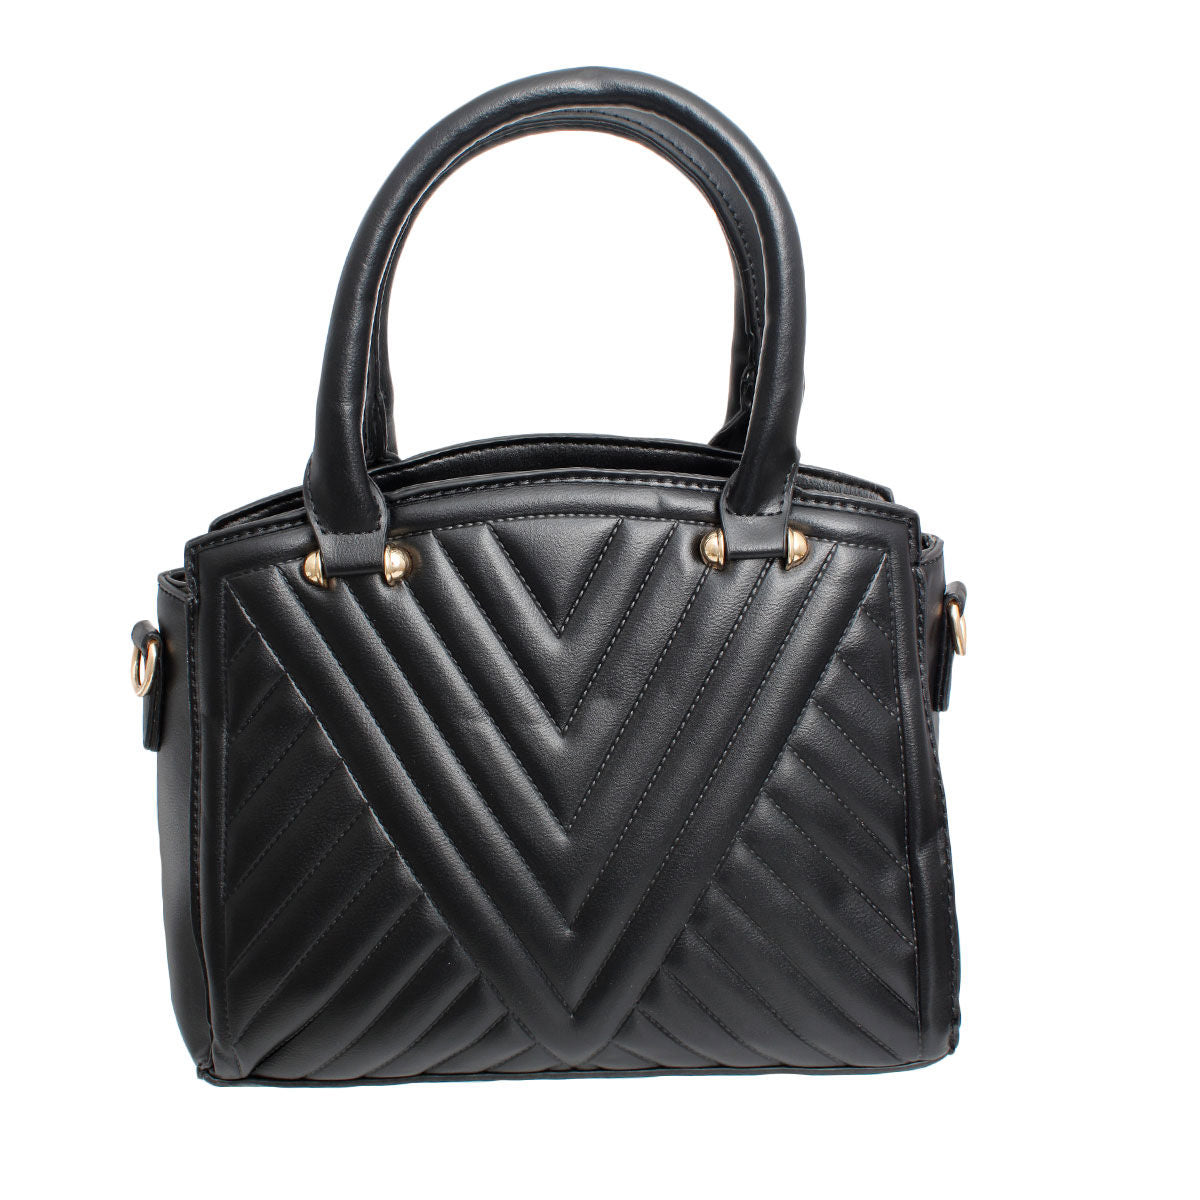 Purse Black Chevron Quilted Set Bag for Women